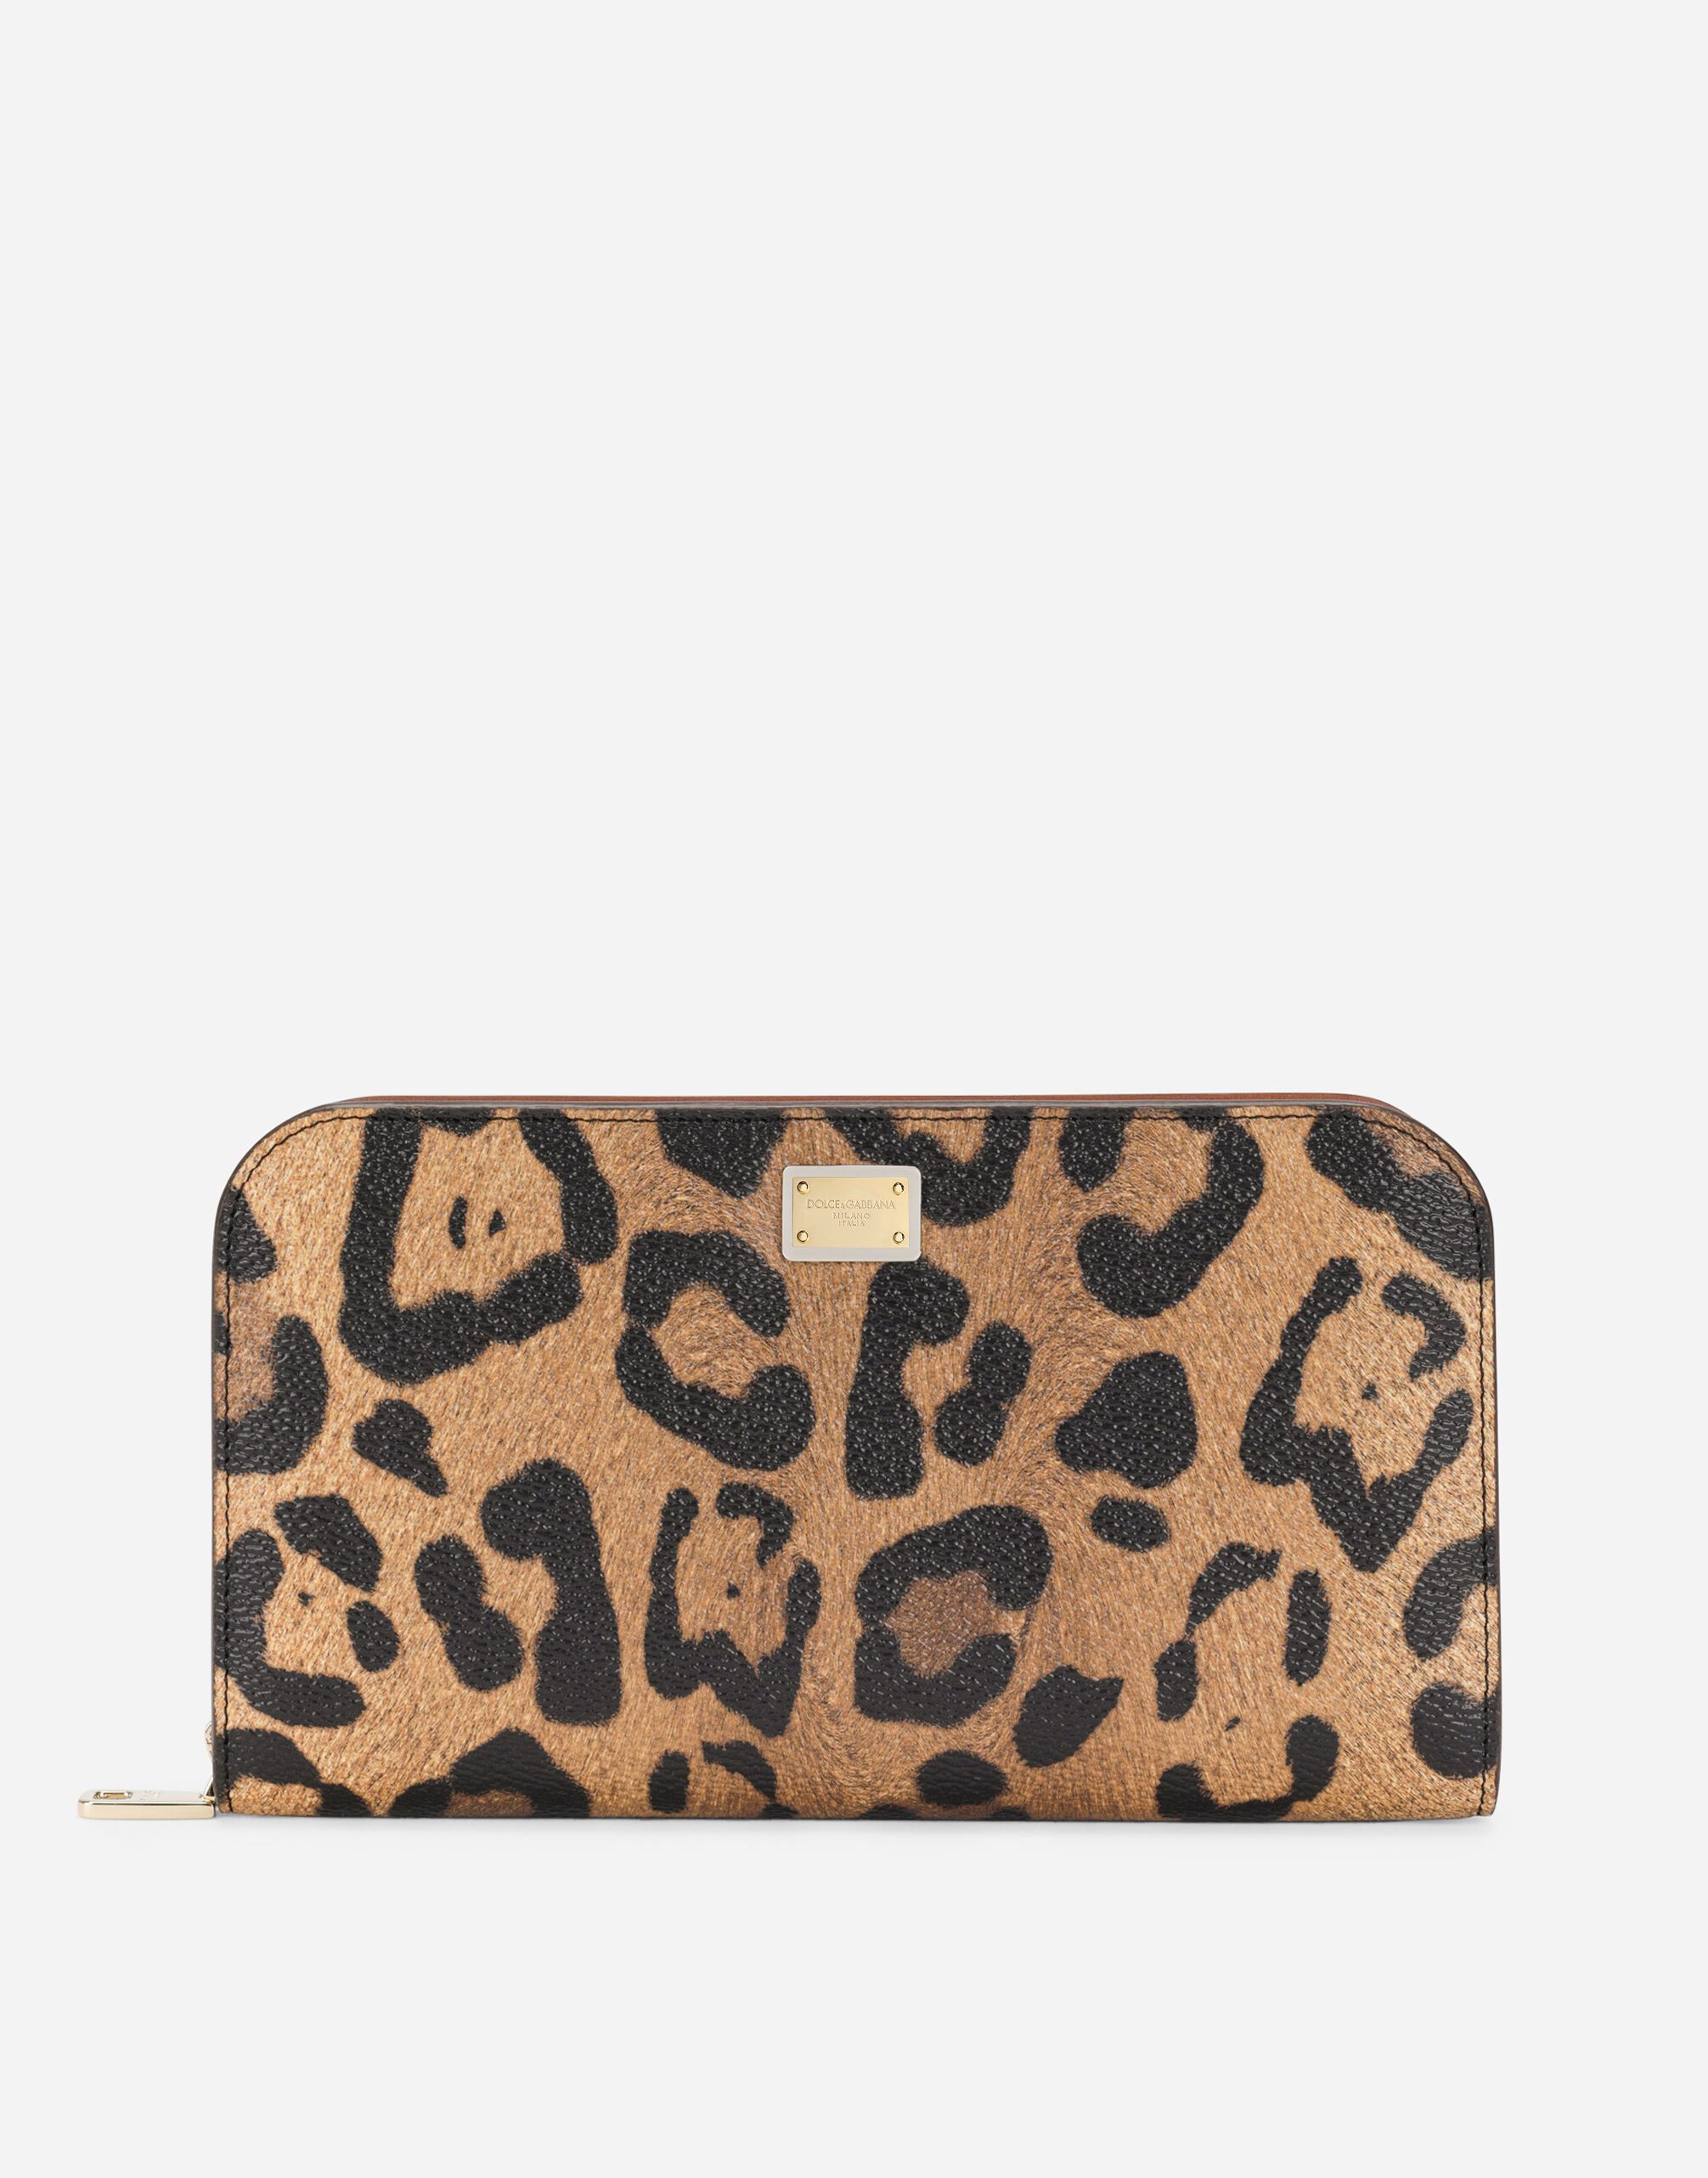 Dolce & Gabbana Leopard-print Crespo zip-around wallet with branded plate Multicolor BB6933AW384